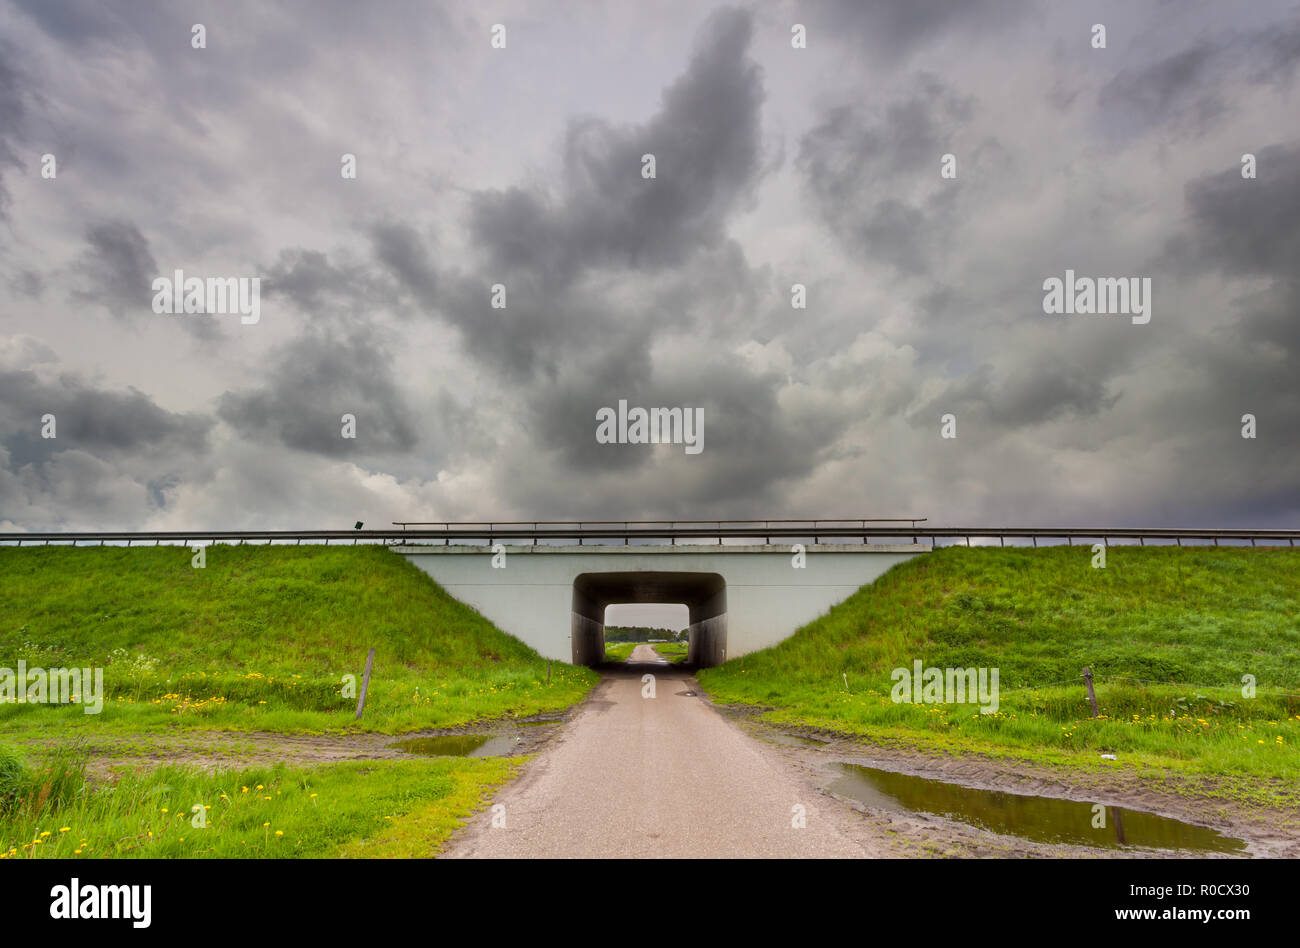 Tunnel leading to clouds as a metaphor for approaching a problematic period in life Stock Photo